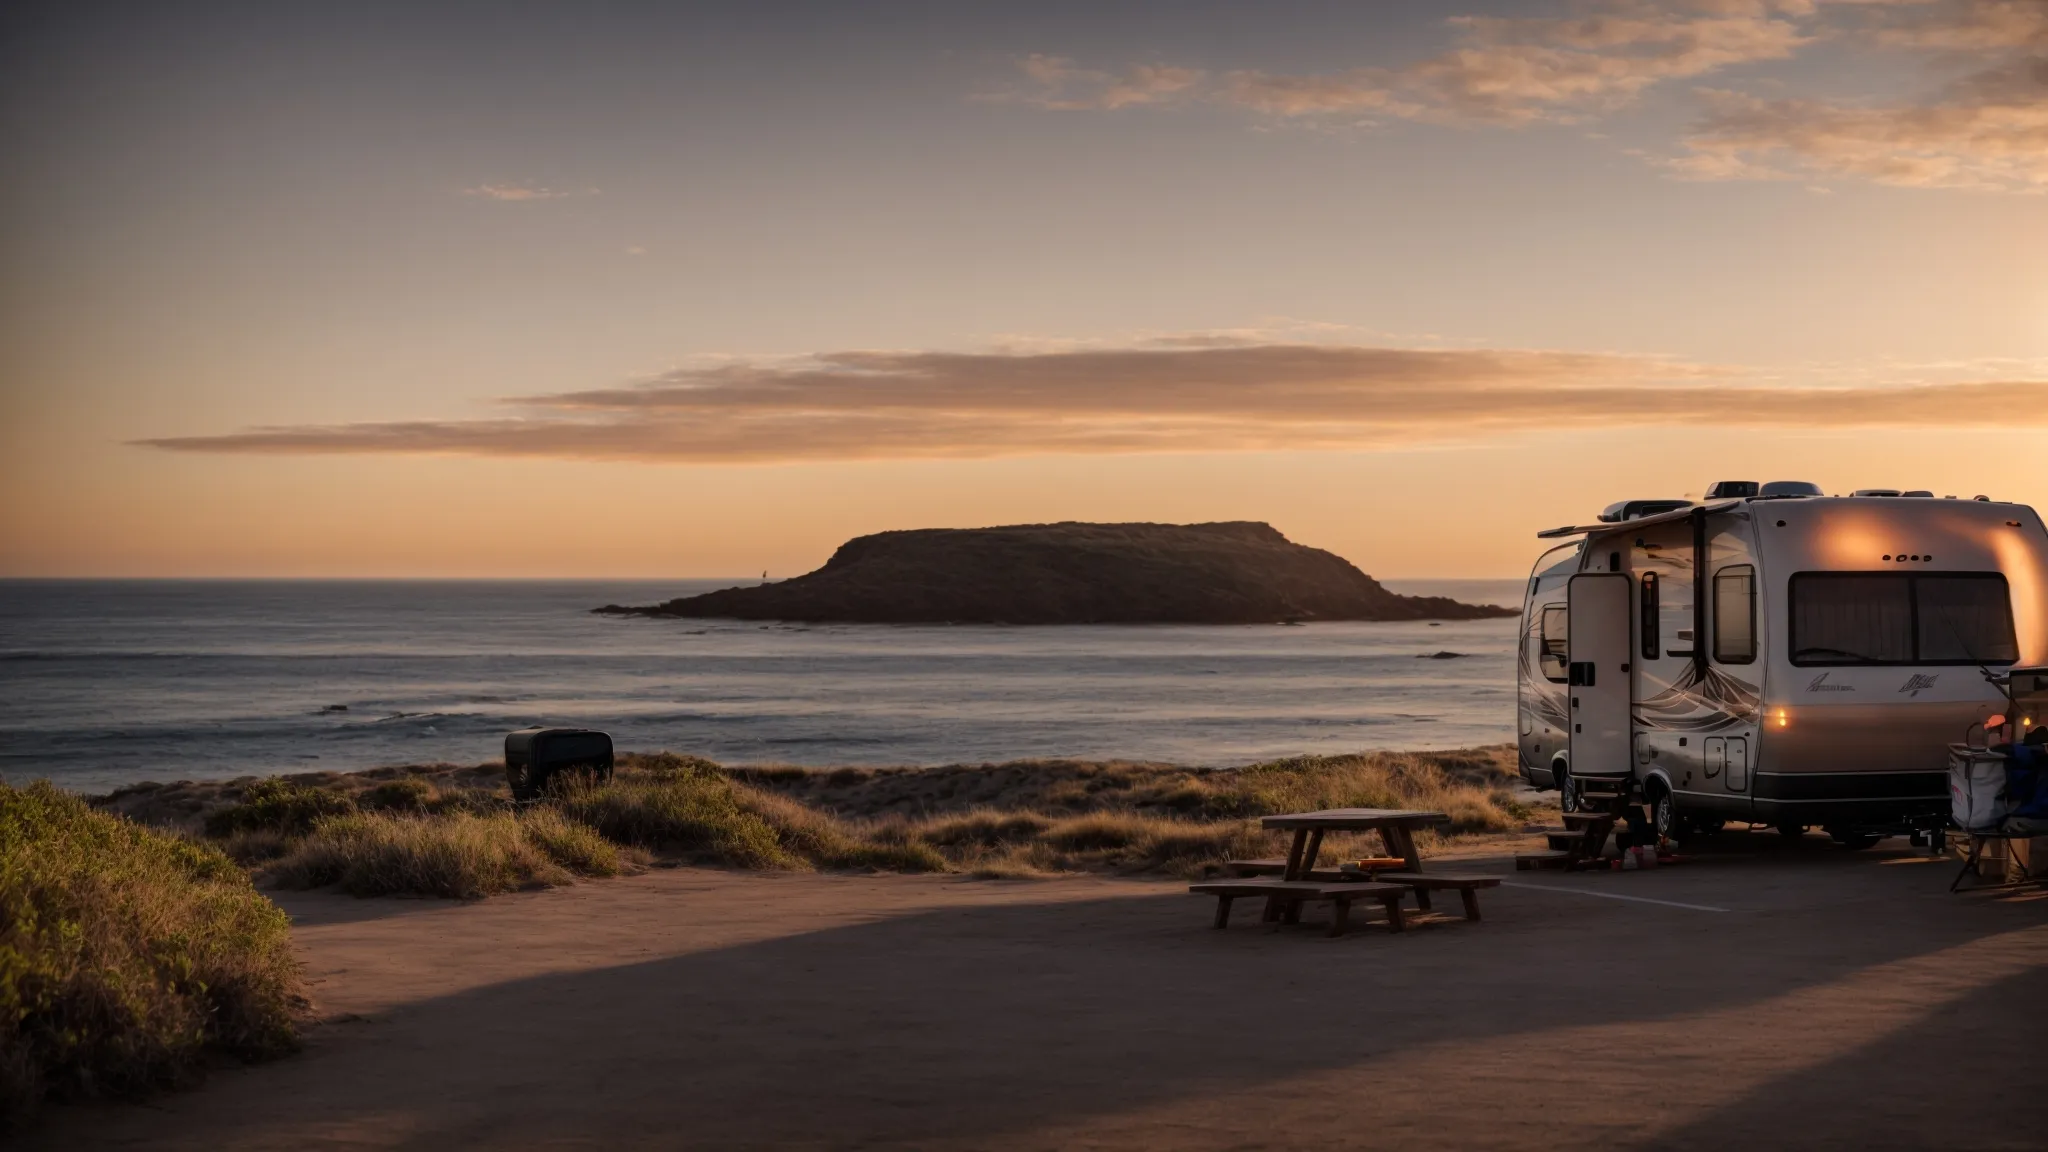 an rv parked by the ocean's edge, basked in the glow of a sunset with a nearby picnic table and a wifi signal board visible.